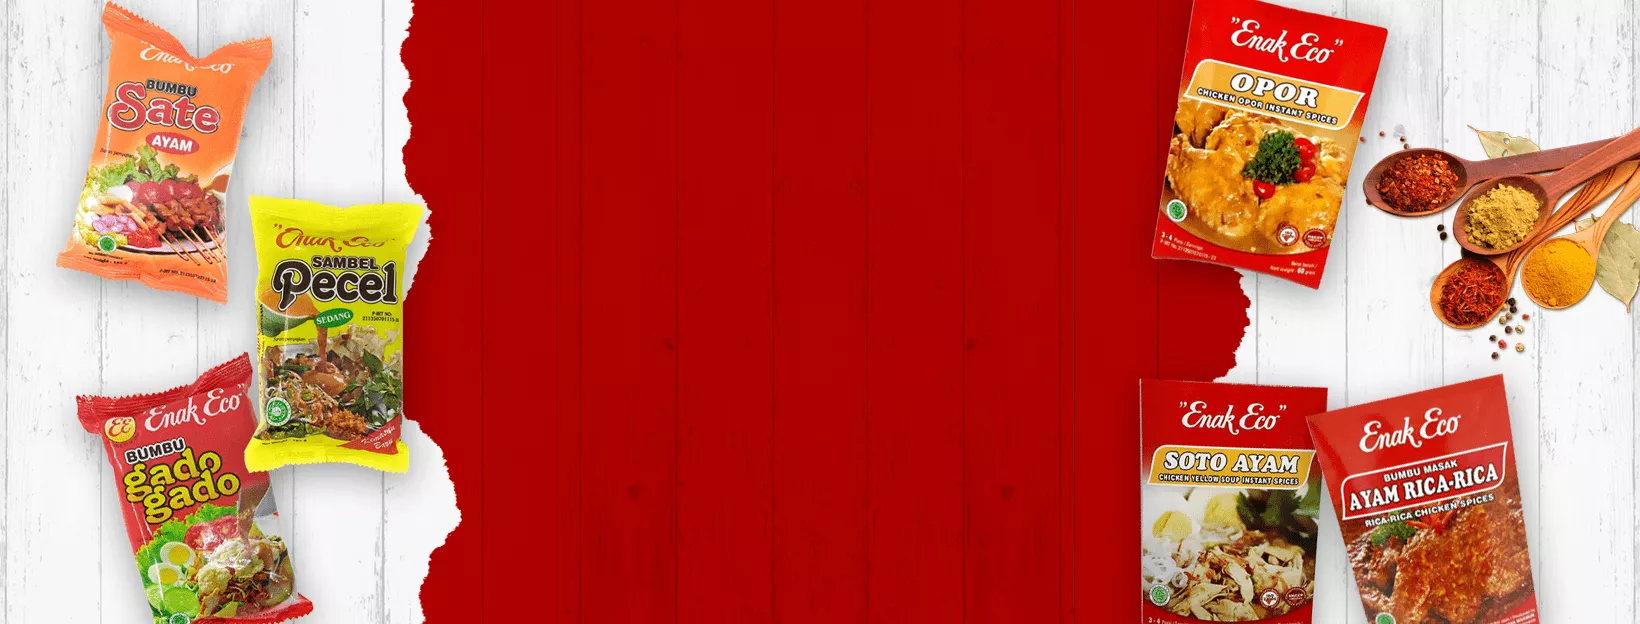 Background Wood Red and White